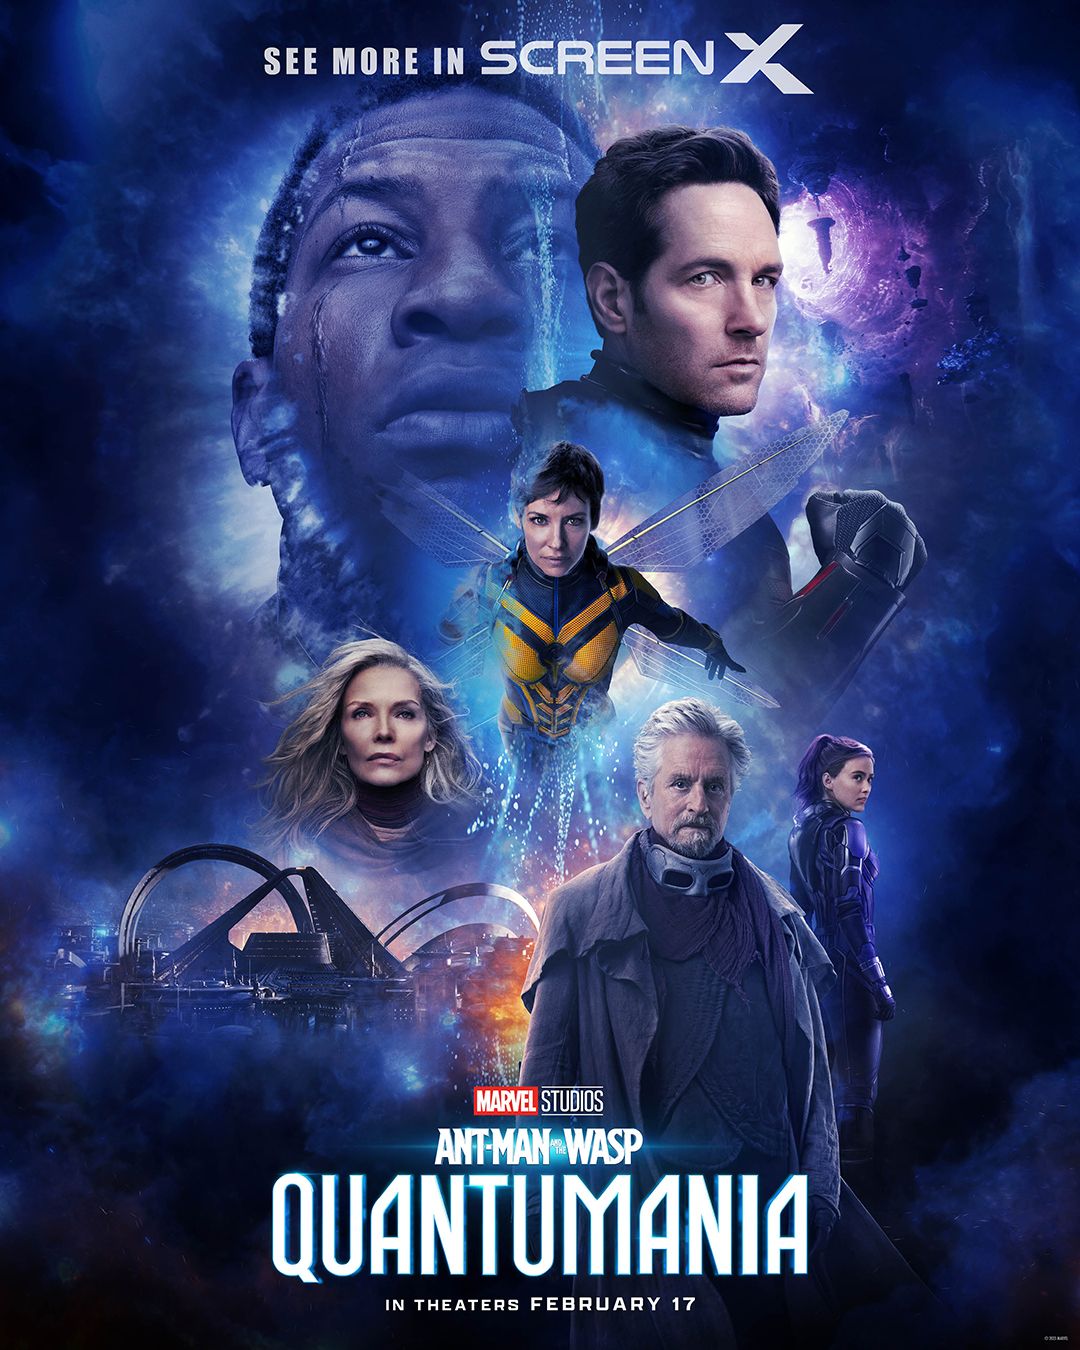 ant-man-and-the-wasp-quantumania-screenx-poster